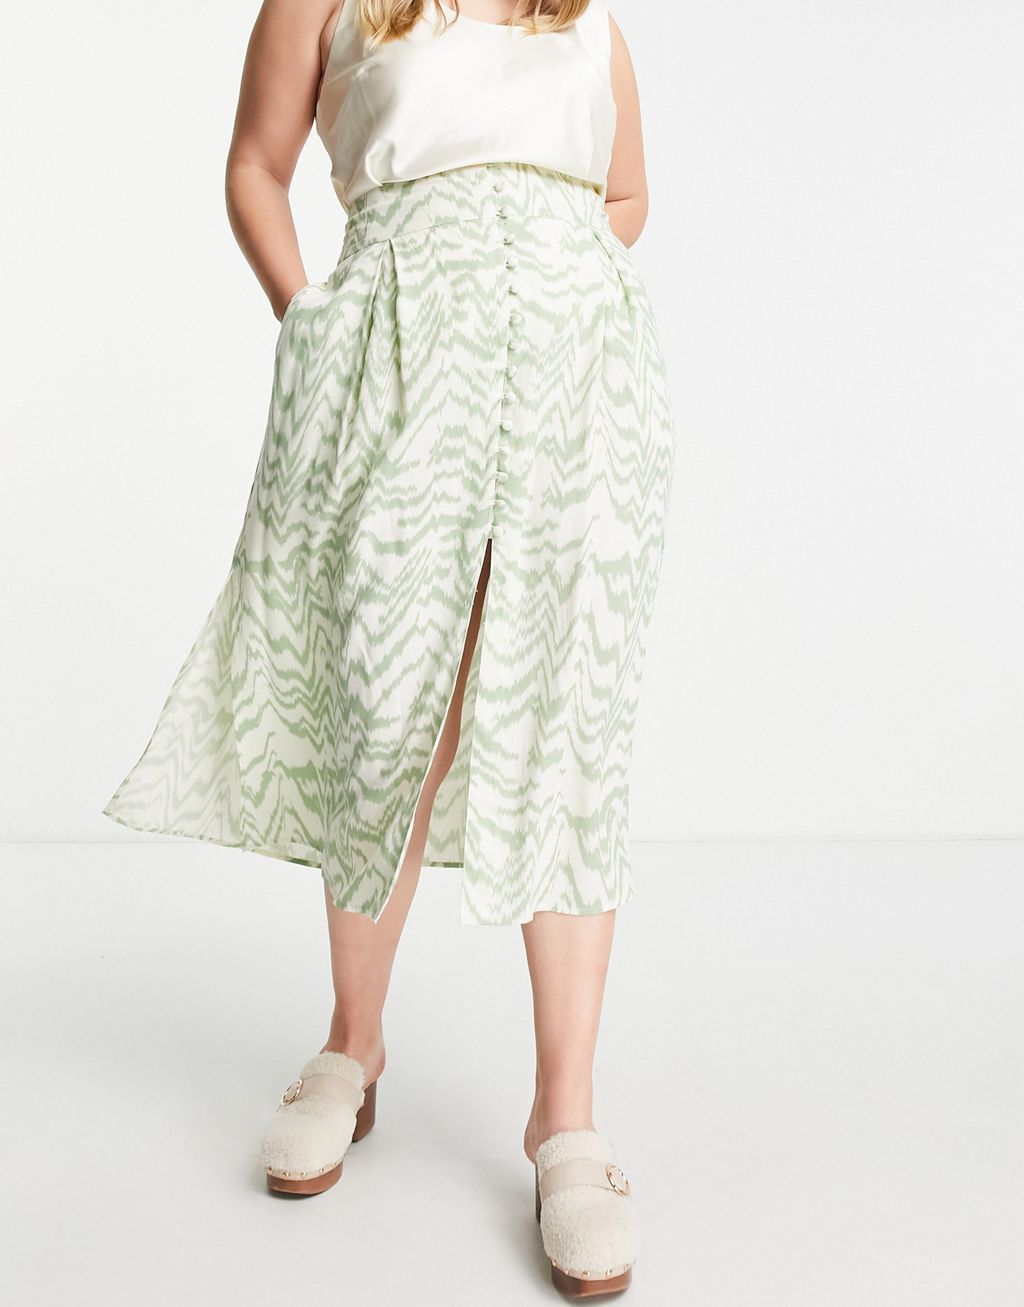 Plus-size skirt by ASOS DESIGN Always here for animal print High rise Button-through front Functional pockets Side splits Regular fit Sold by Asos